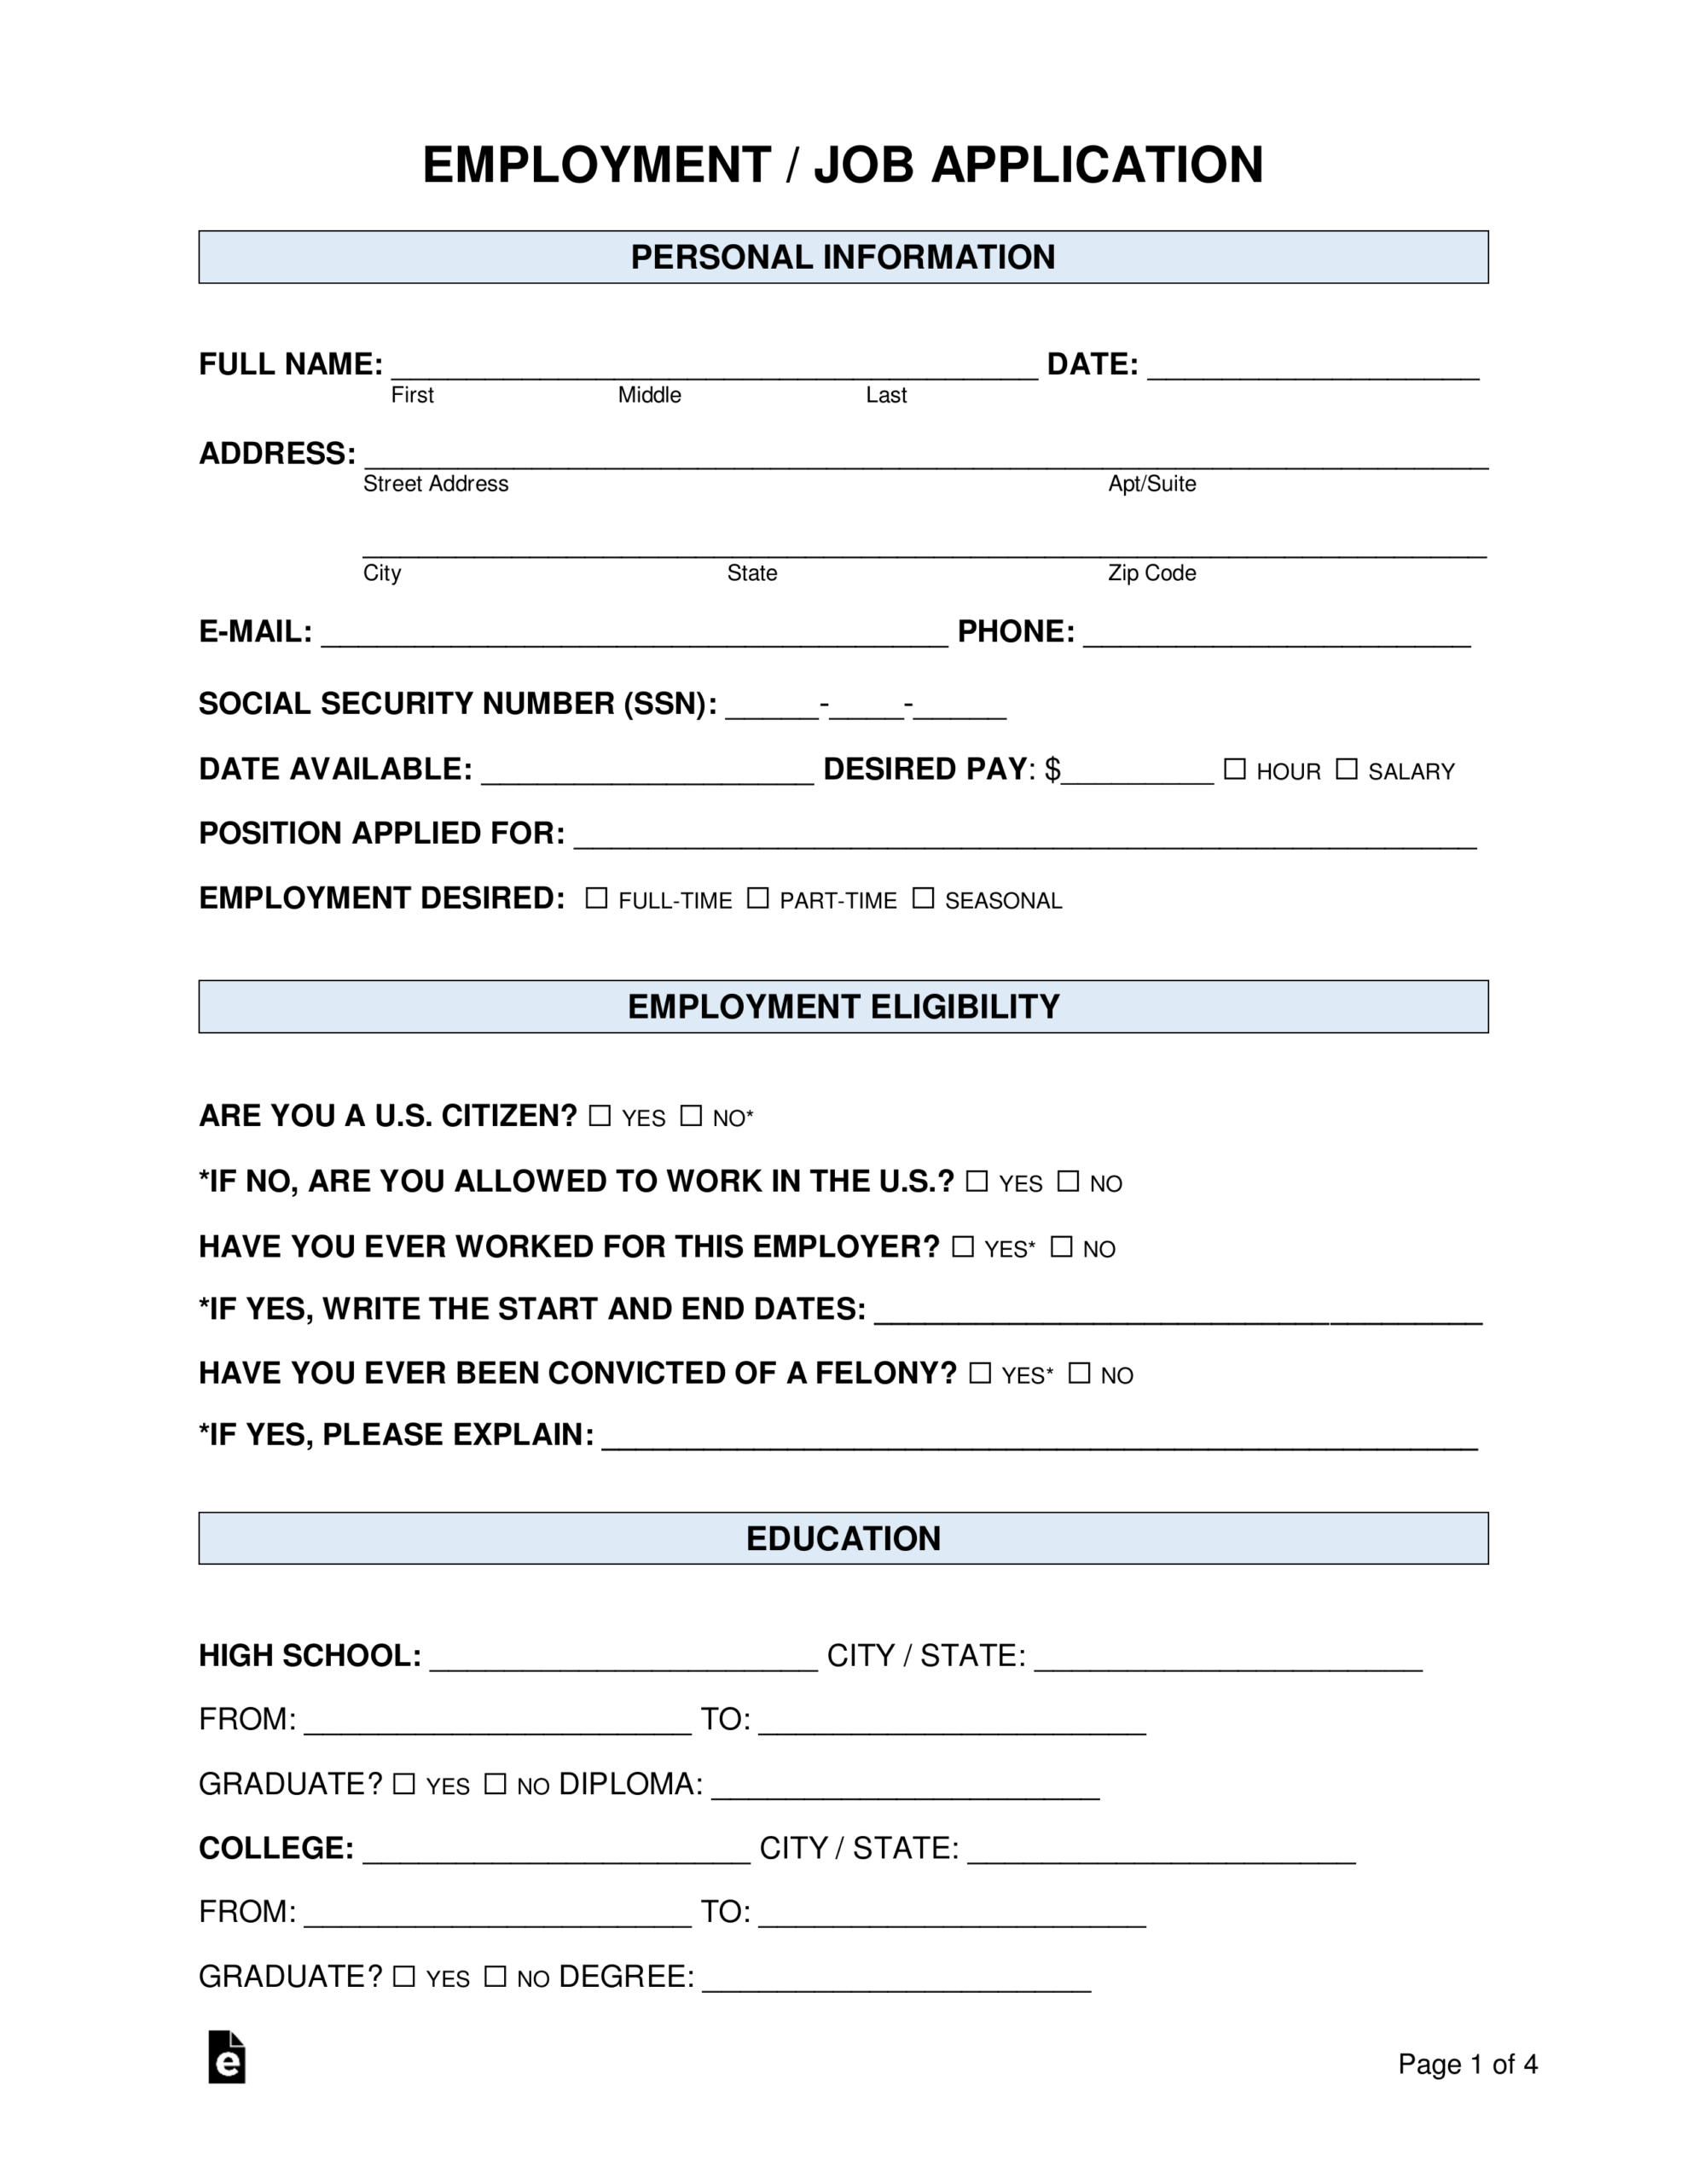 Free Job Application Form - Standard Template - Word | Pdf Within Employment Application Template Microsoft Word